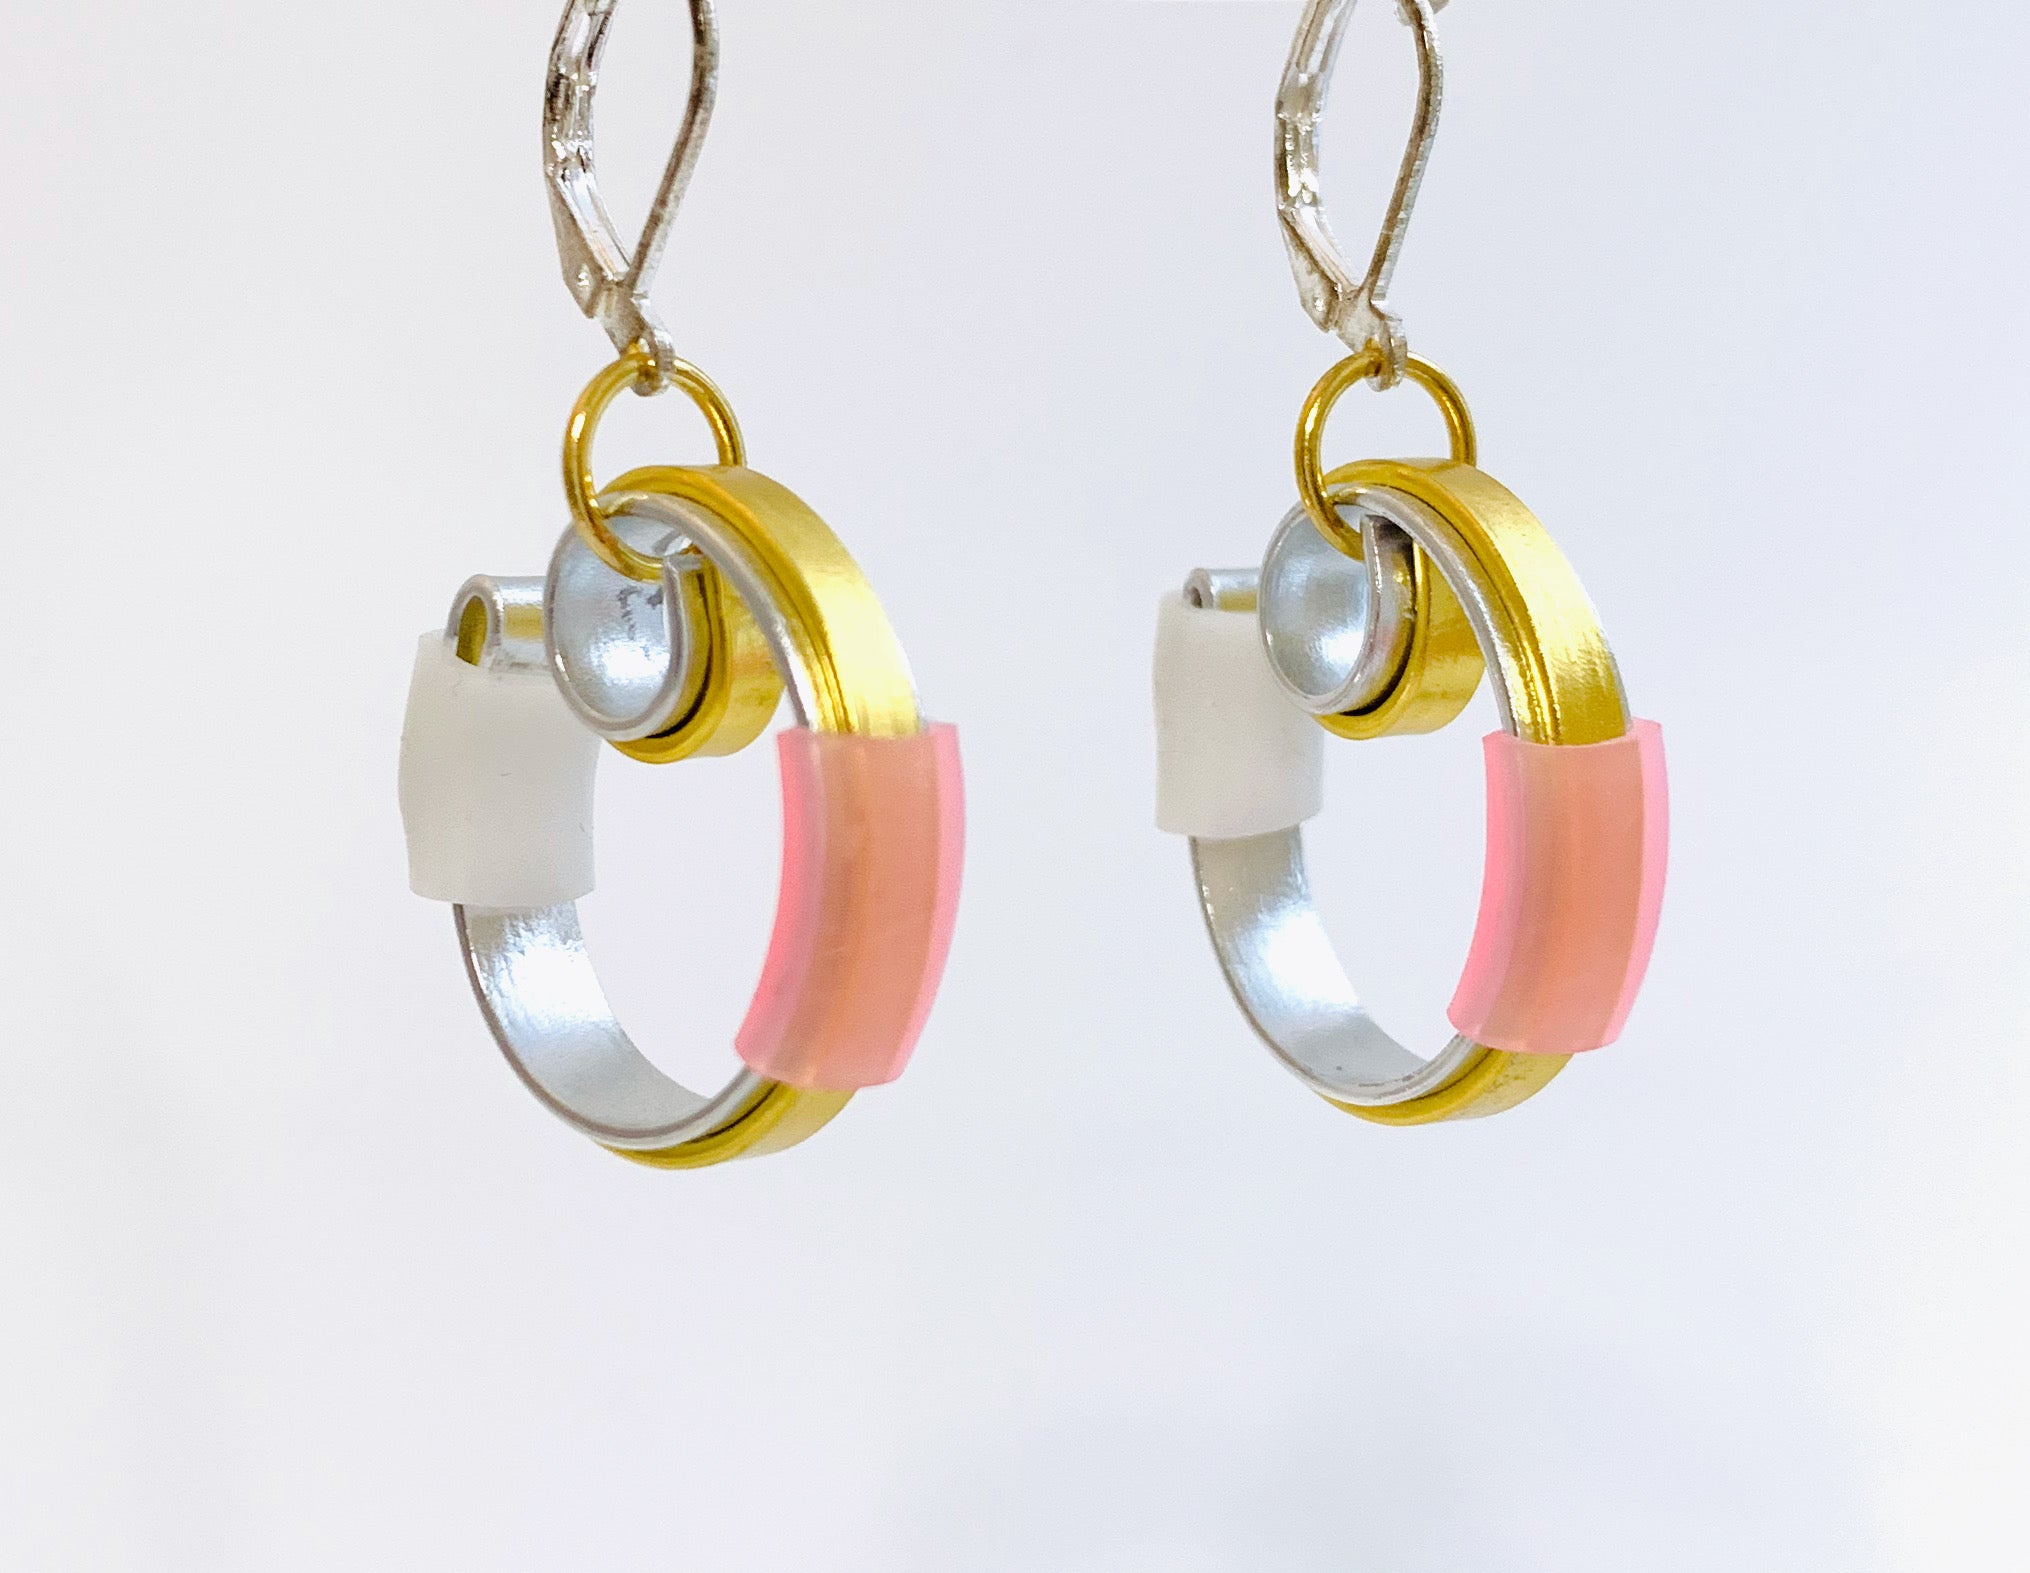 Once Made Earrings: Double Reels in silver+gold and gold+silver